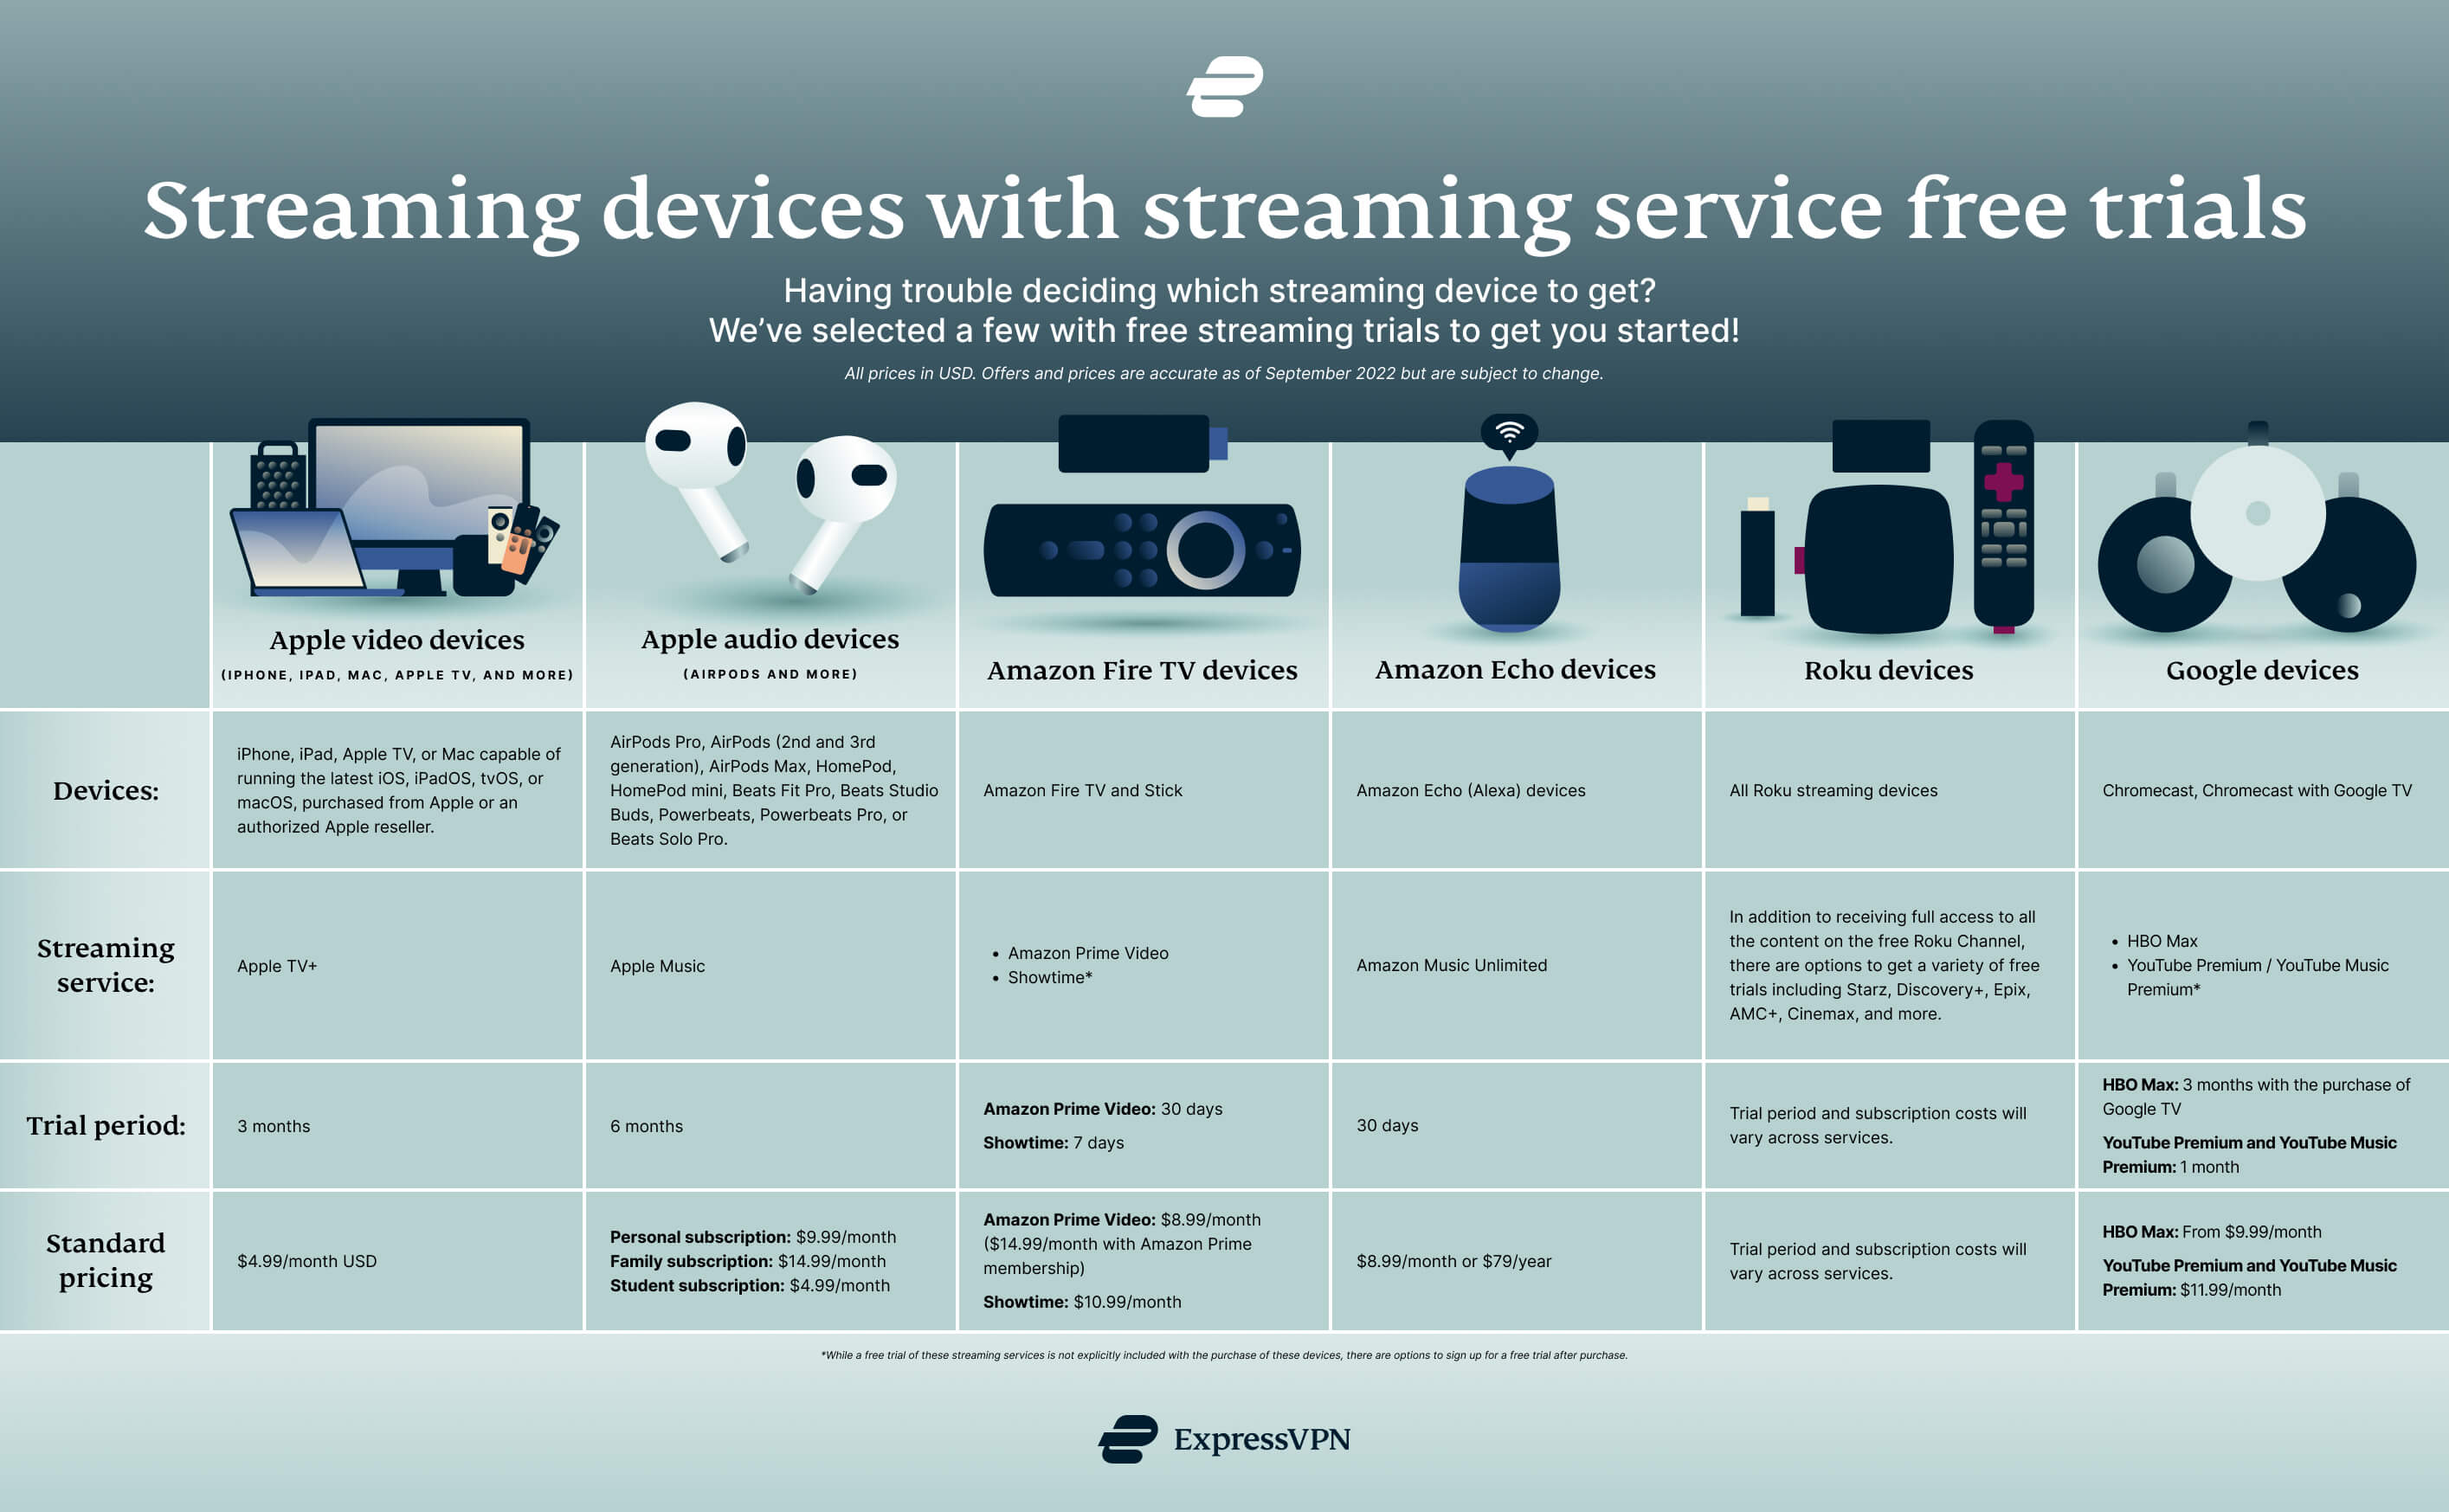 Our Ultimate Guide to the Best Streaming Services, Reviewed and Compared